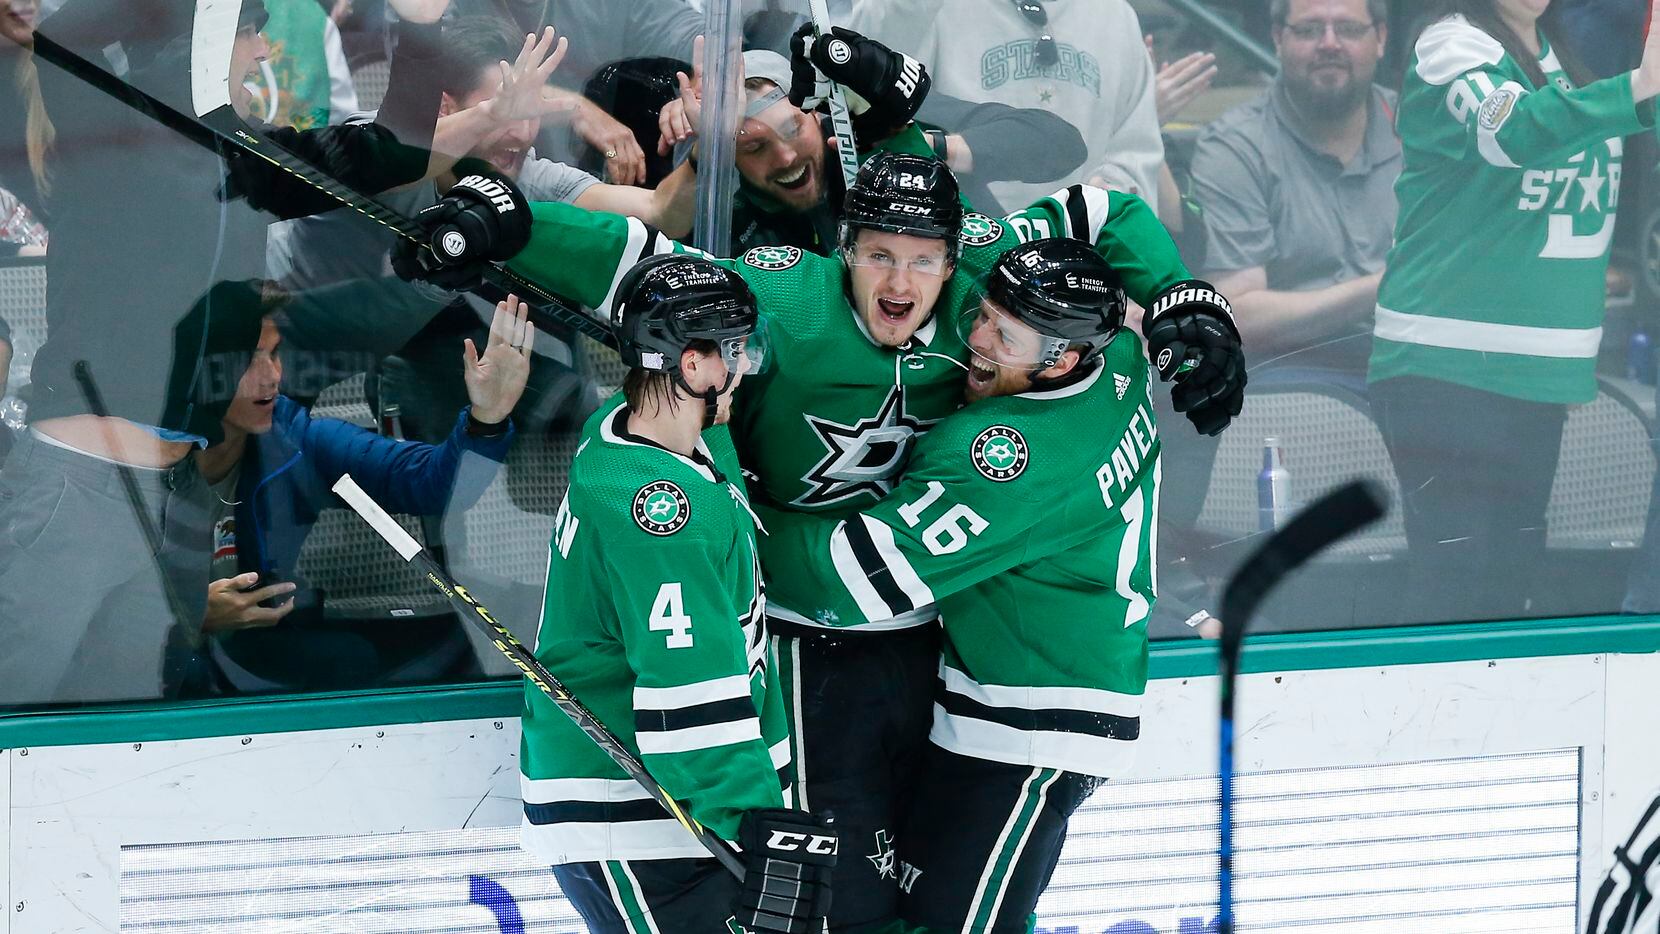 Dallas Stars forward Roope Hintz, center, is congratulated by defenseman Miro Heiskanen (4) and forward Joe Pavelski (16) after scoring a goal during the second period of an NHL hockey game against the Detroit Red Wings, Tuesday, November 16, 2021. (Brandon Wade/Special Contributor)